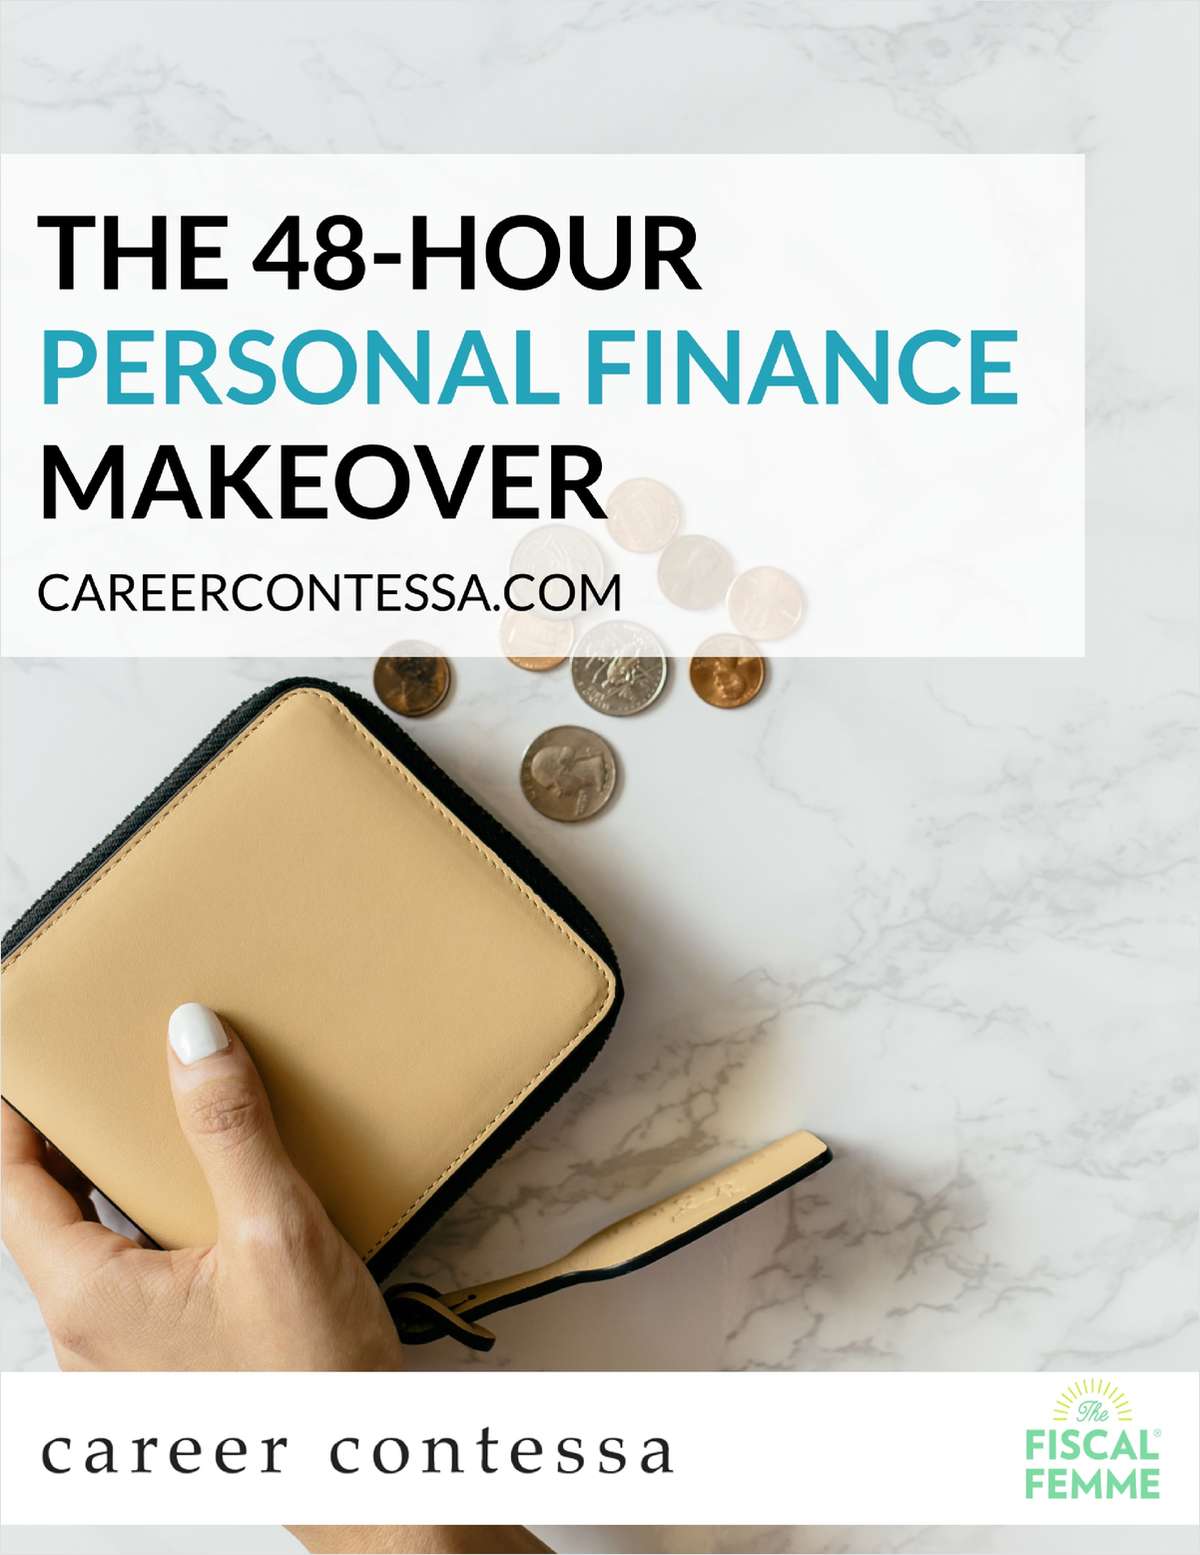 The 48-Hour Personal Finance Makeover Guide